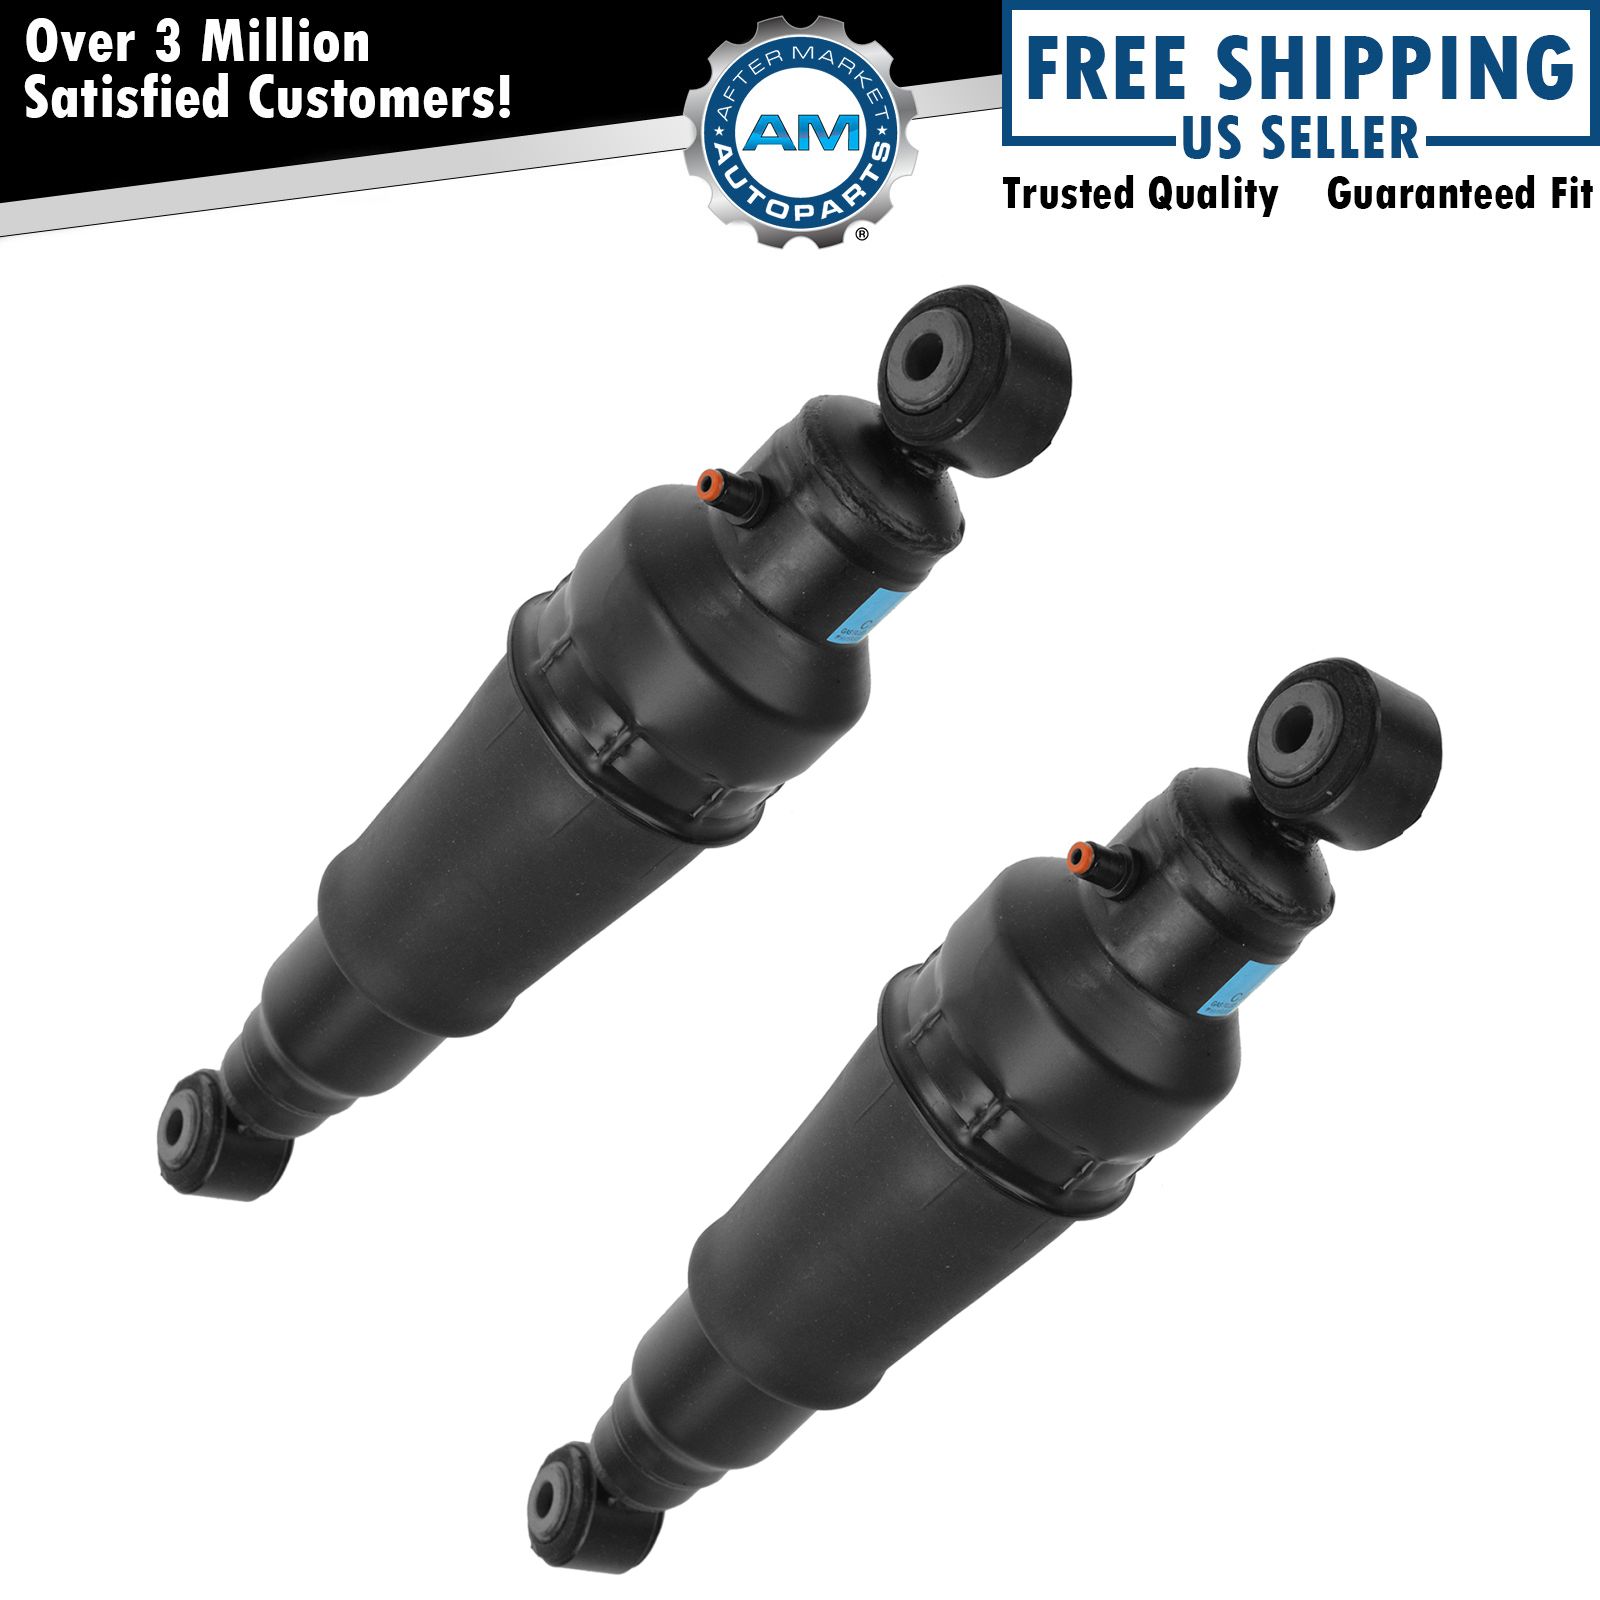 OEM 56200ZV60A Auto Leveling Air Shock Set Rear for 08-13 Nissan Armada 2010 Nissan Armada Auto Leveling Rear Suspension